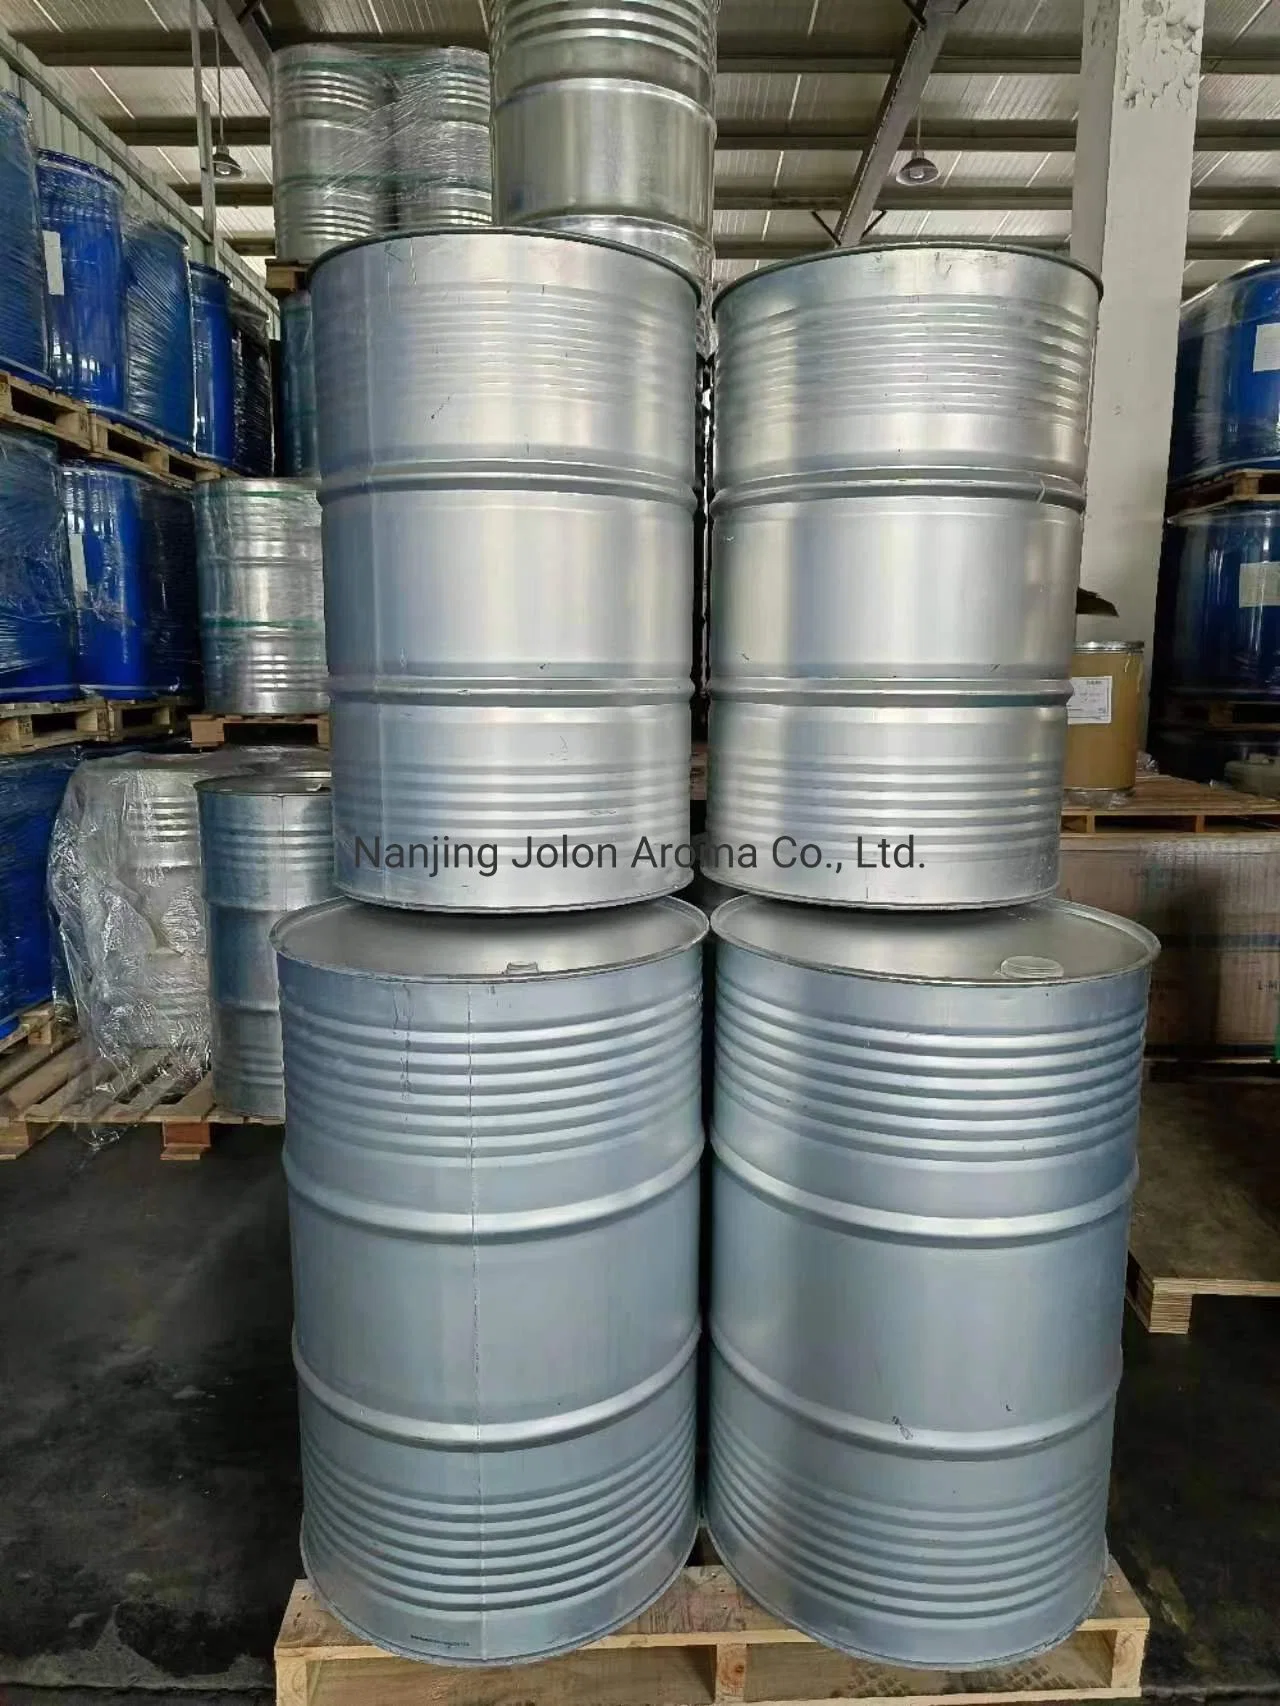 Diphenyl Ether, Diphenyl Oxide, Dpo, CAS: 101-84-8